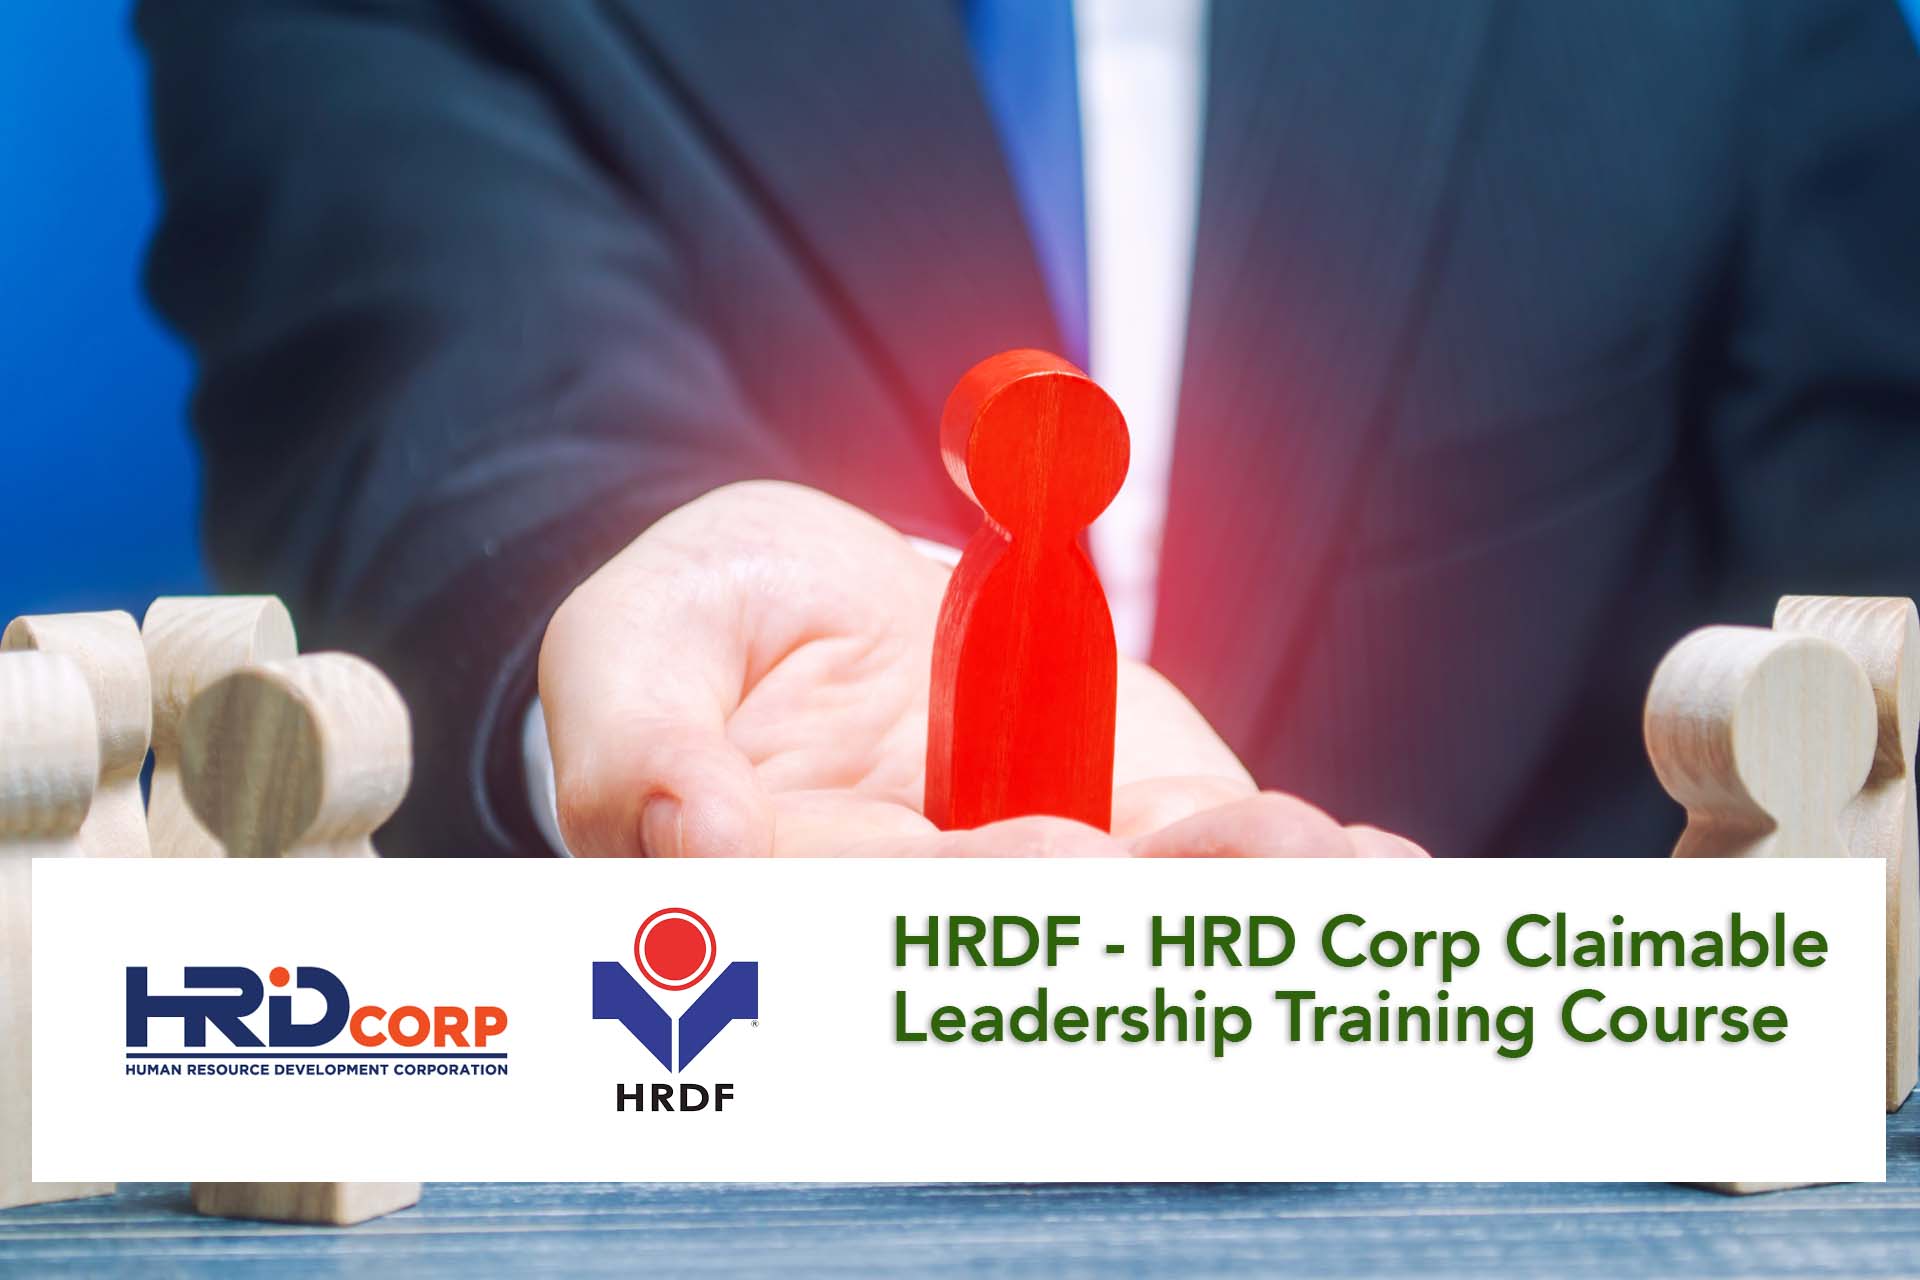 HRDF - HRD Corp Claimable Leadership Training Course